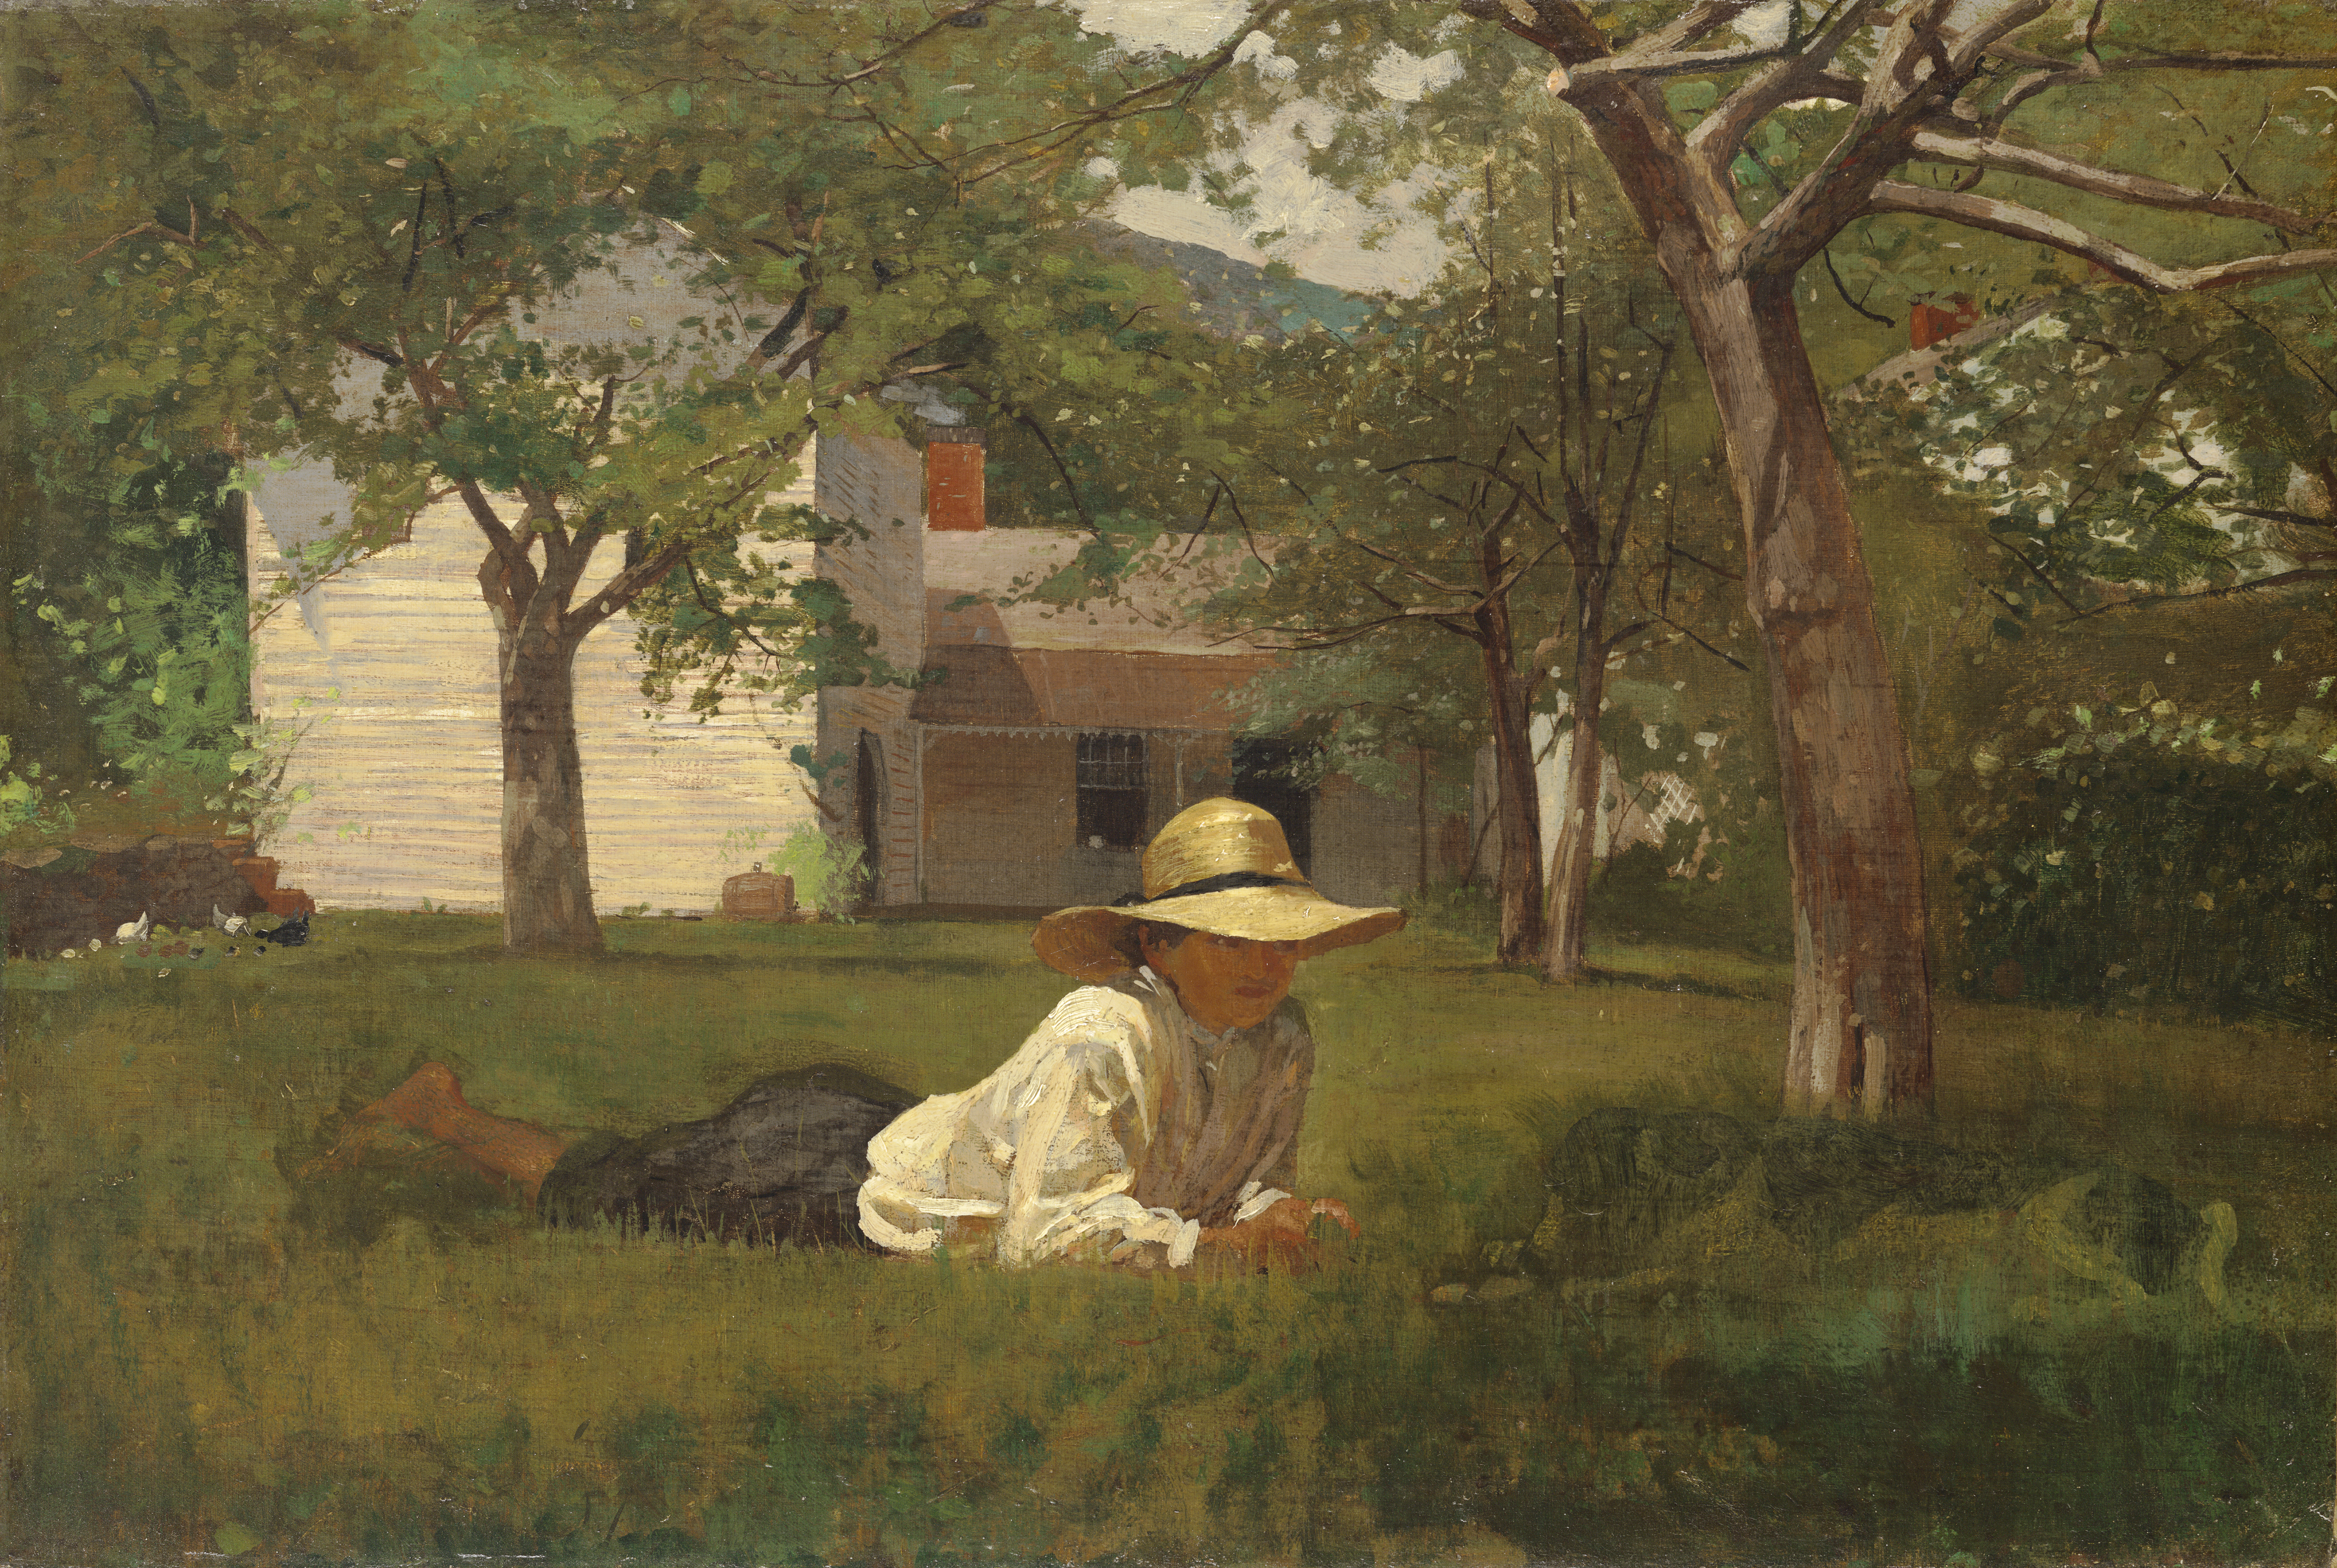 Winslow Homer, The Nooning, c. 1872